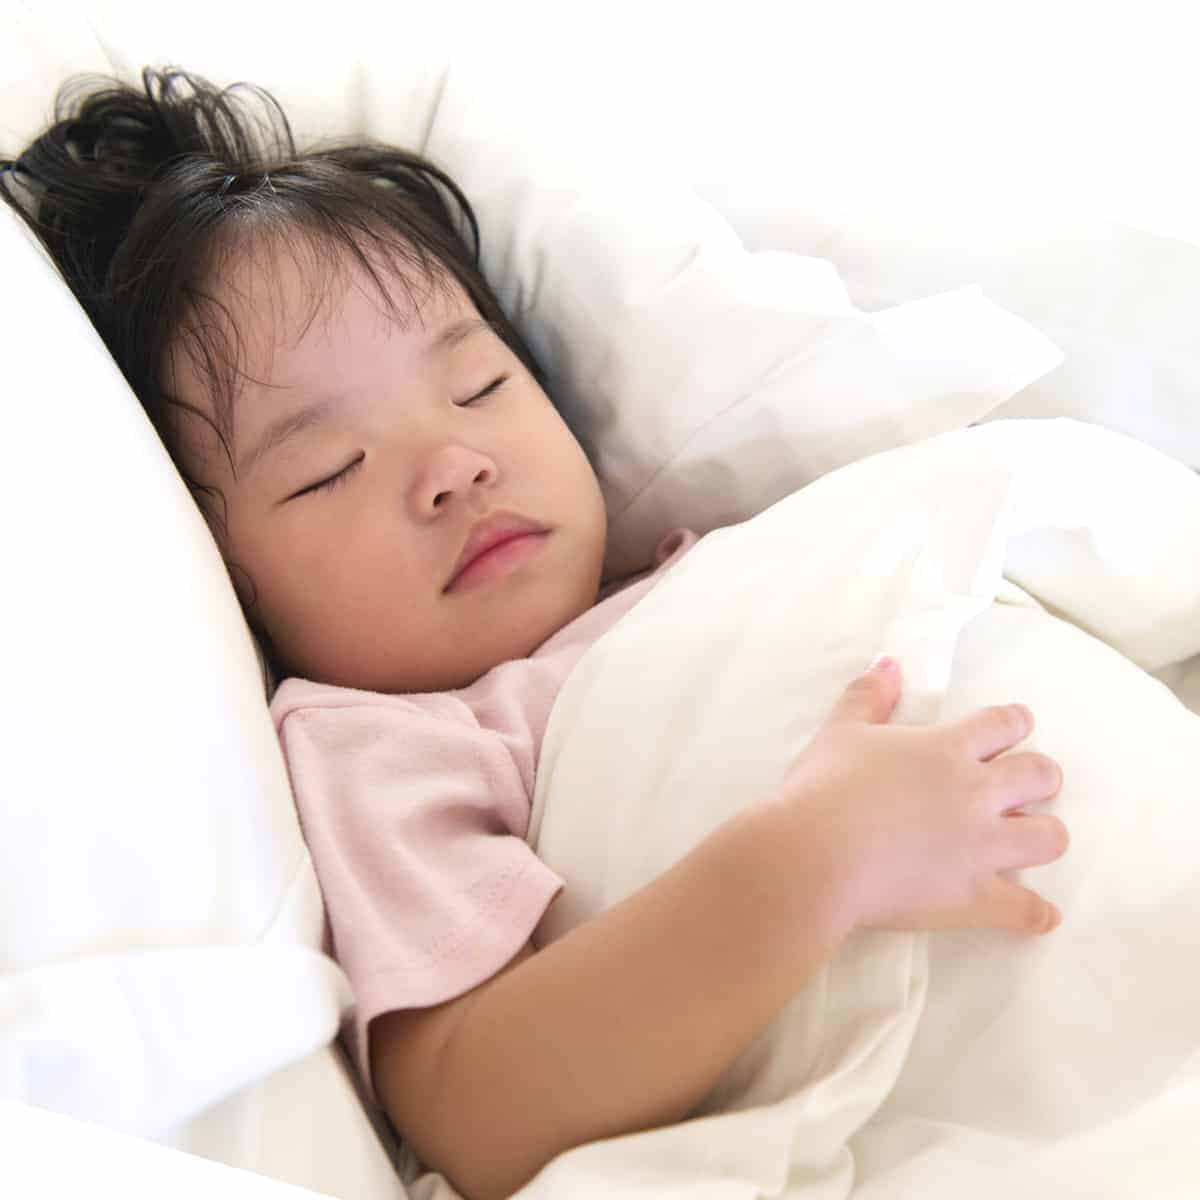 7 Weighted Blankets to Help Kids Sleep and Relax in 2023!